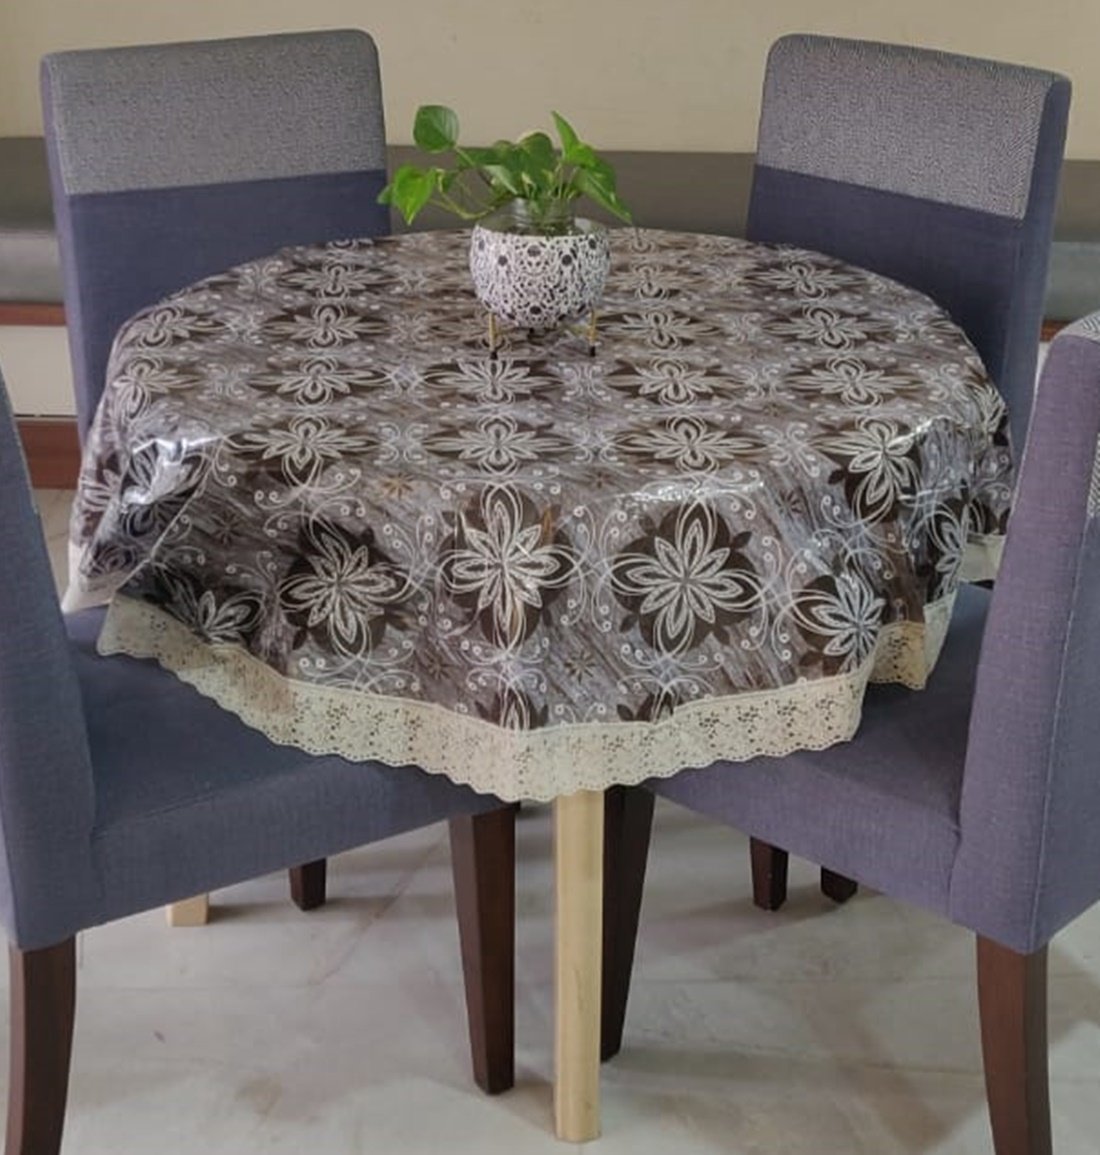 Griiham PVC 4 Seater Printed Round Table Cover (Size - 60 inches) Design - Abstract Floral VK10